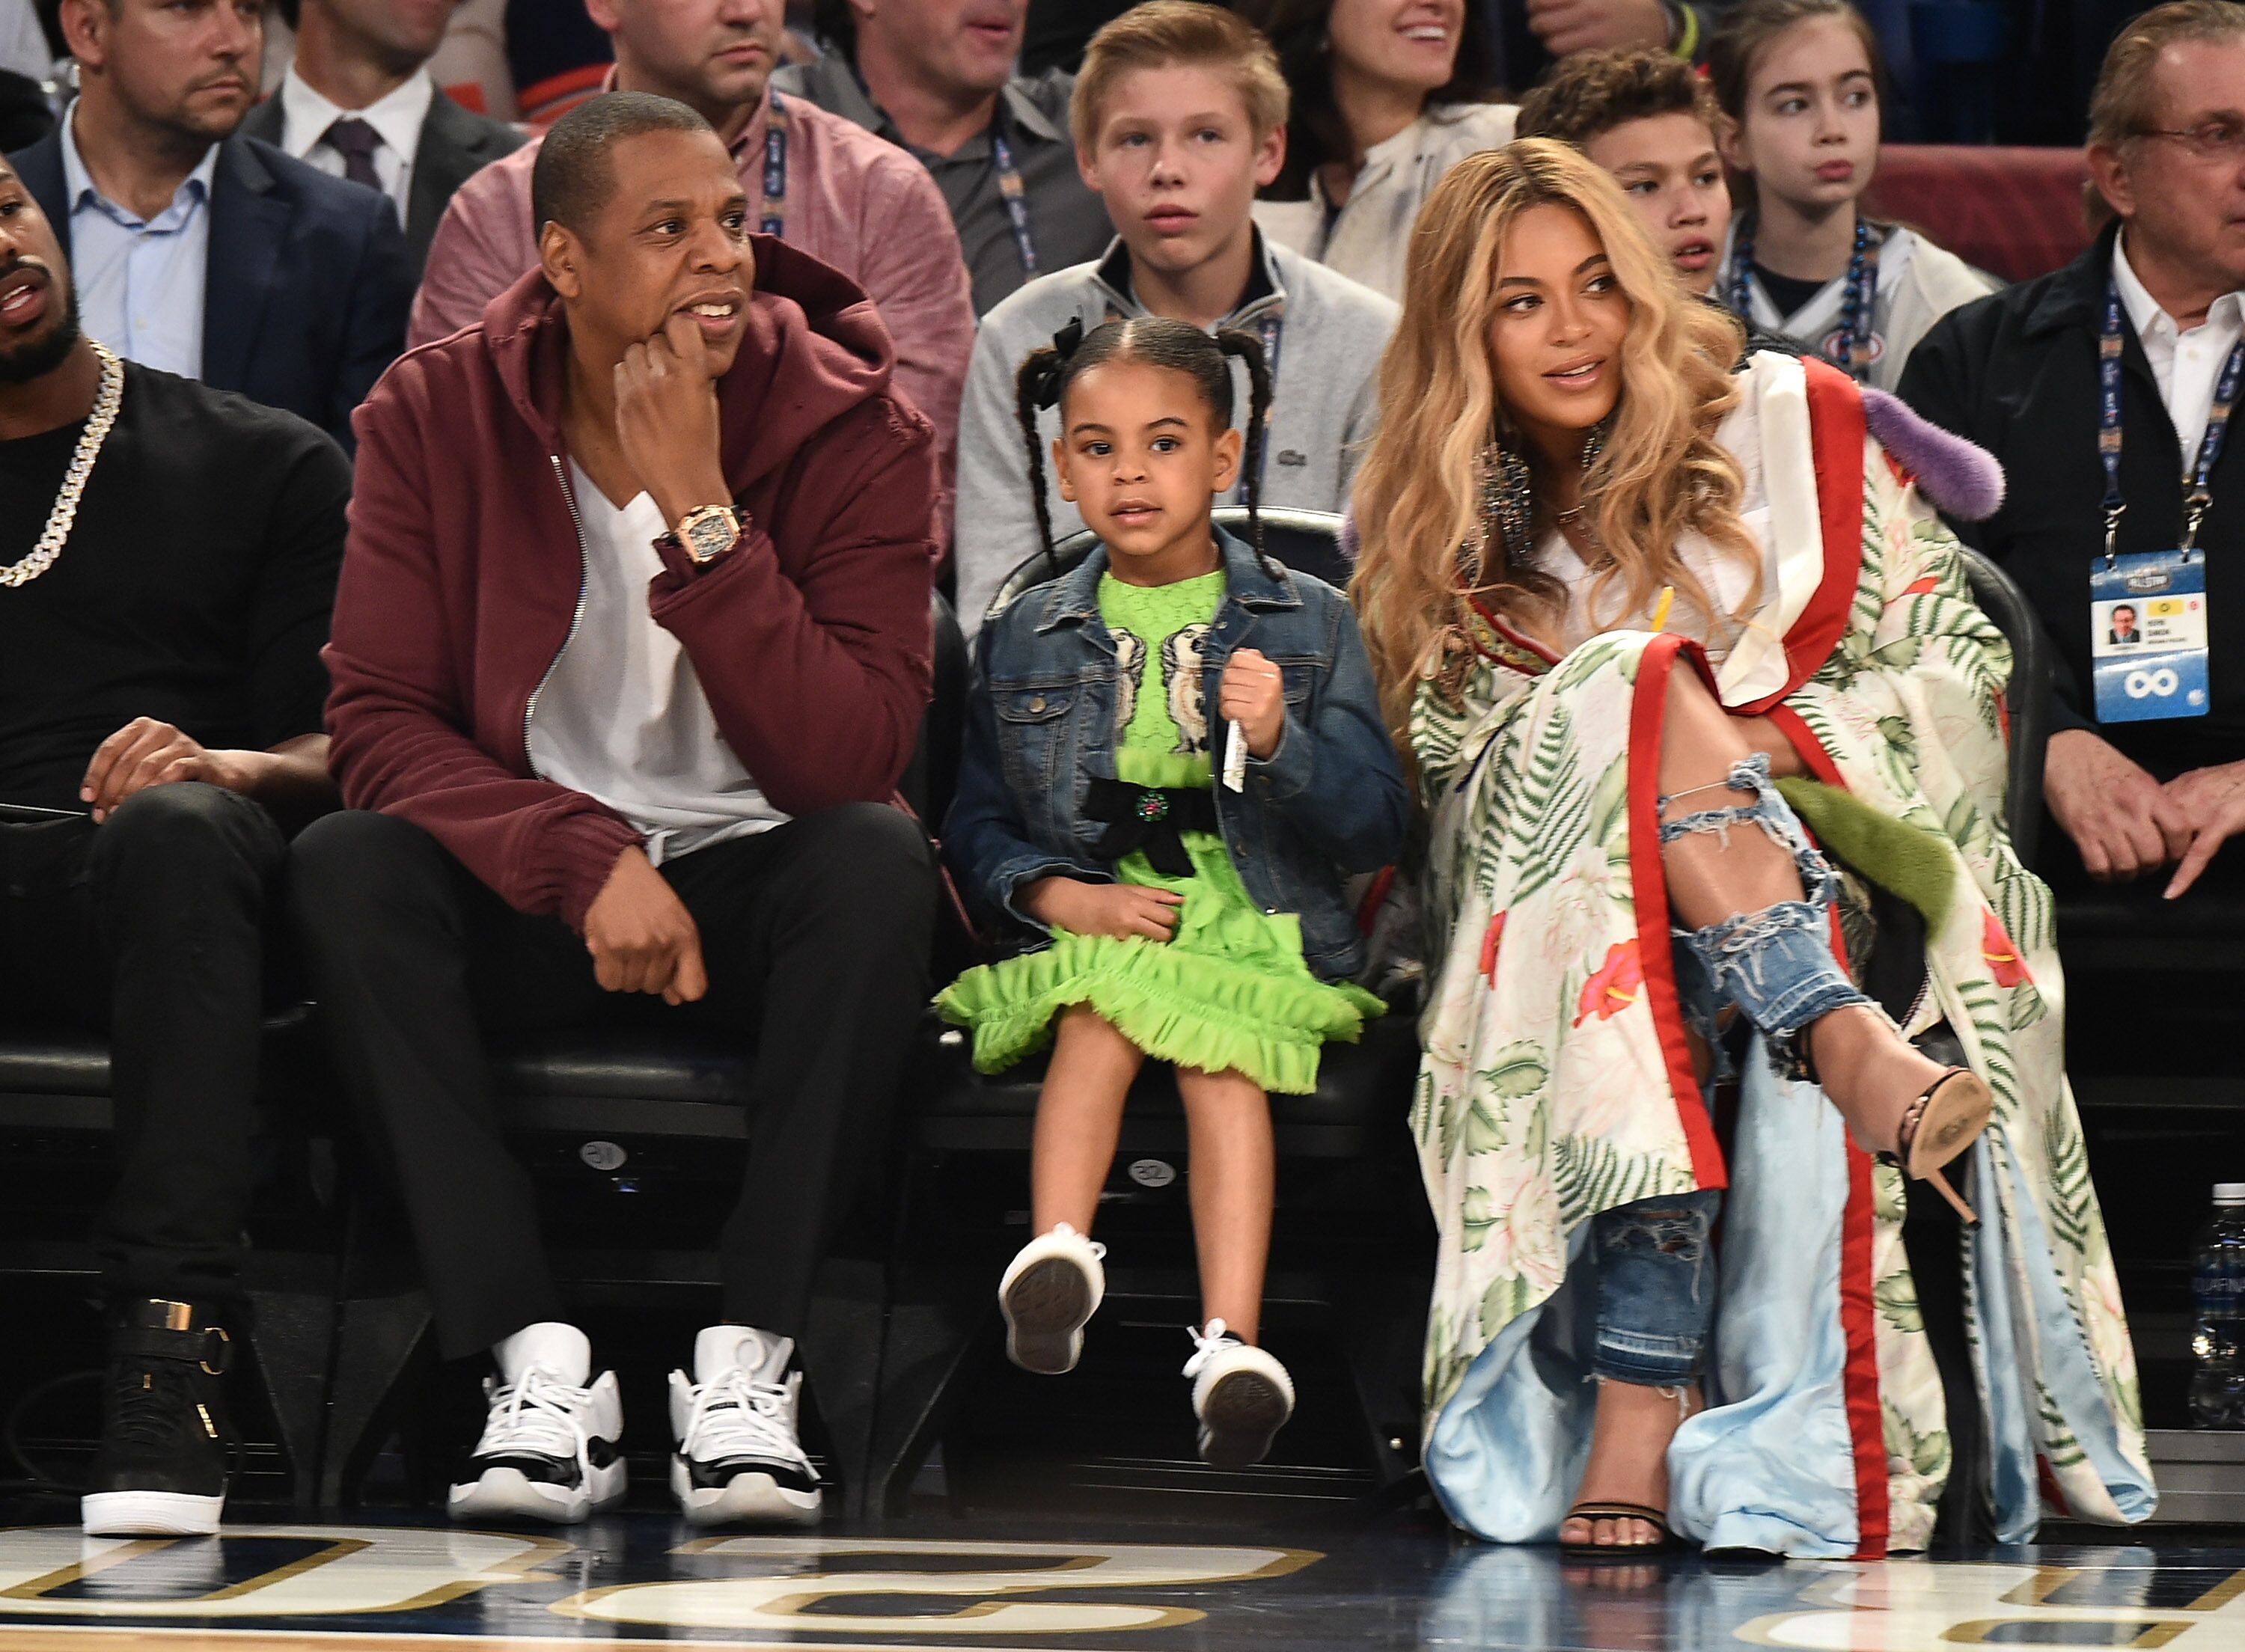 Jay-Z, Beyonce, and Blue Ivy attend a basketball game | Source: Getty Images/GlobalImagesUkraine